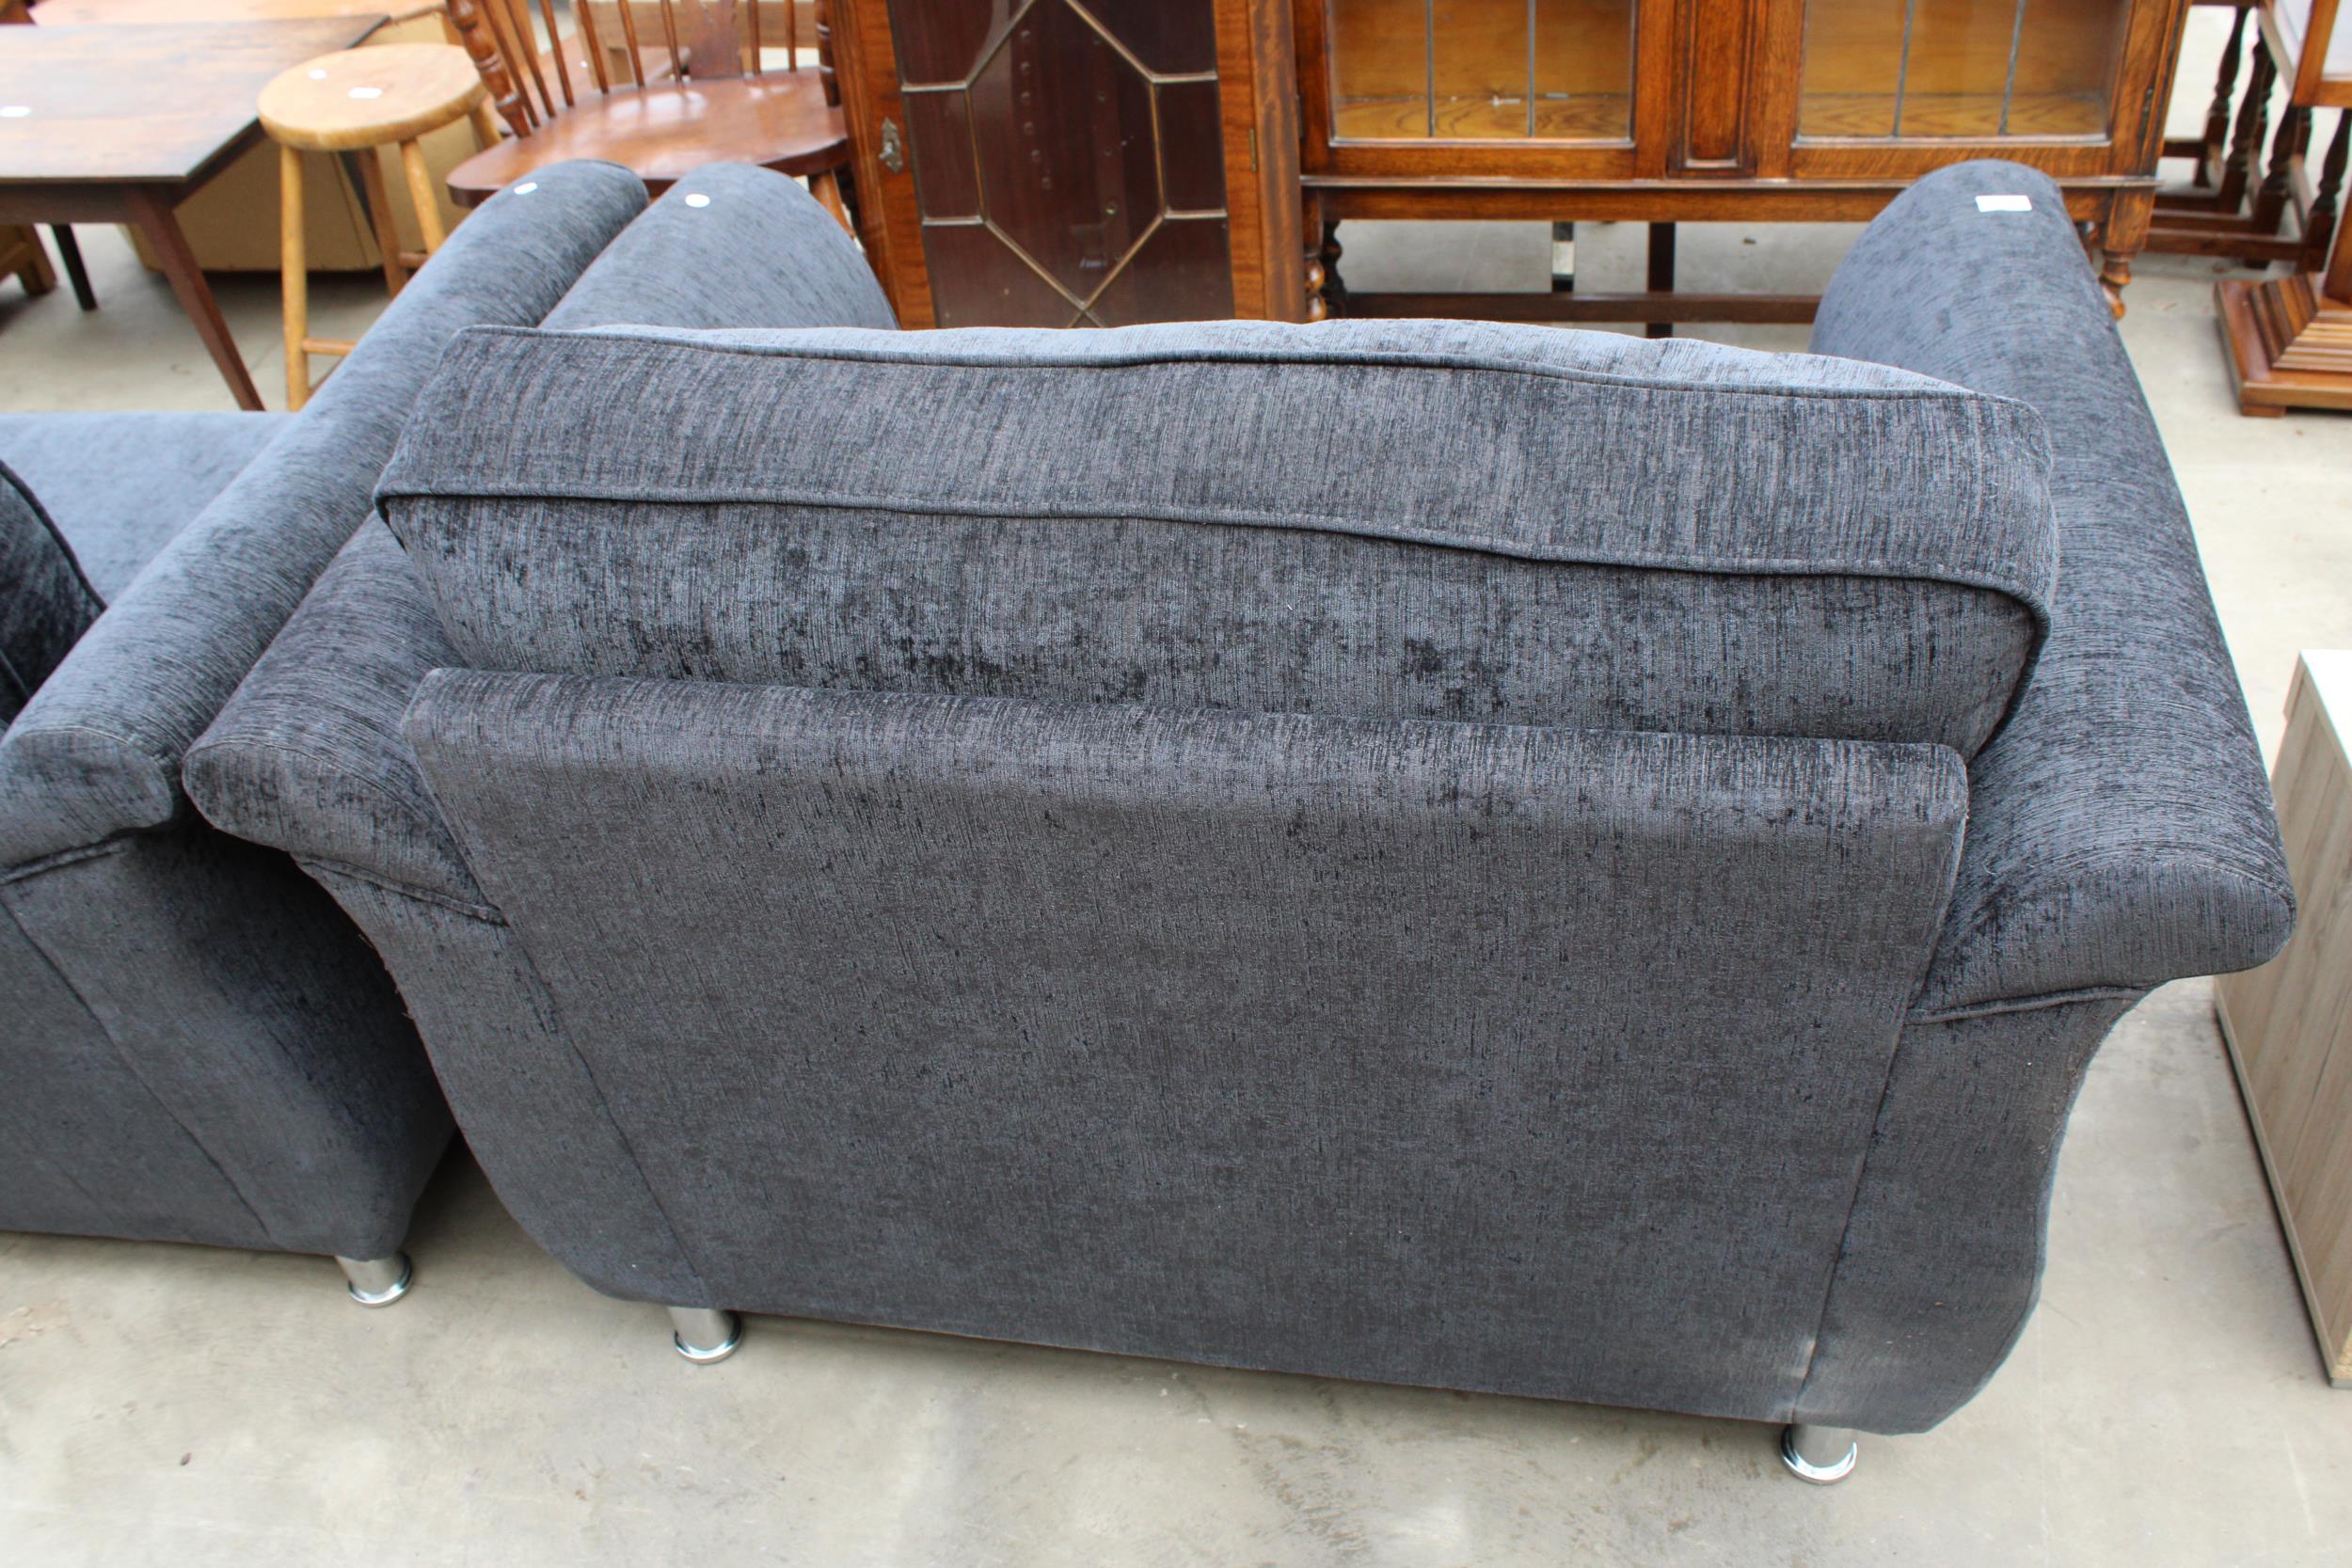 A MODERN SLATE GREY EASY CHAIR WITH POLISHED CHROME BUTTONED ARMS AND LEGS - Image 2 of 2